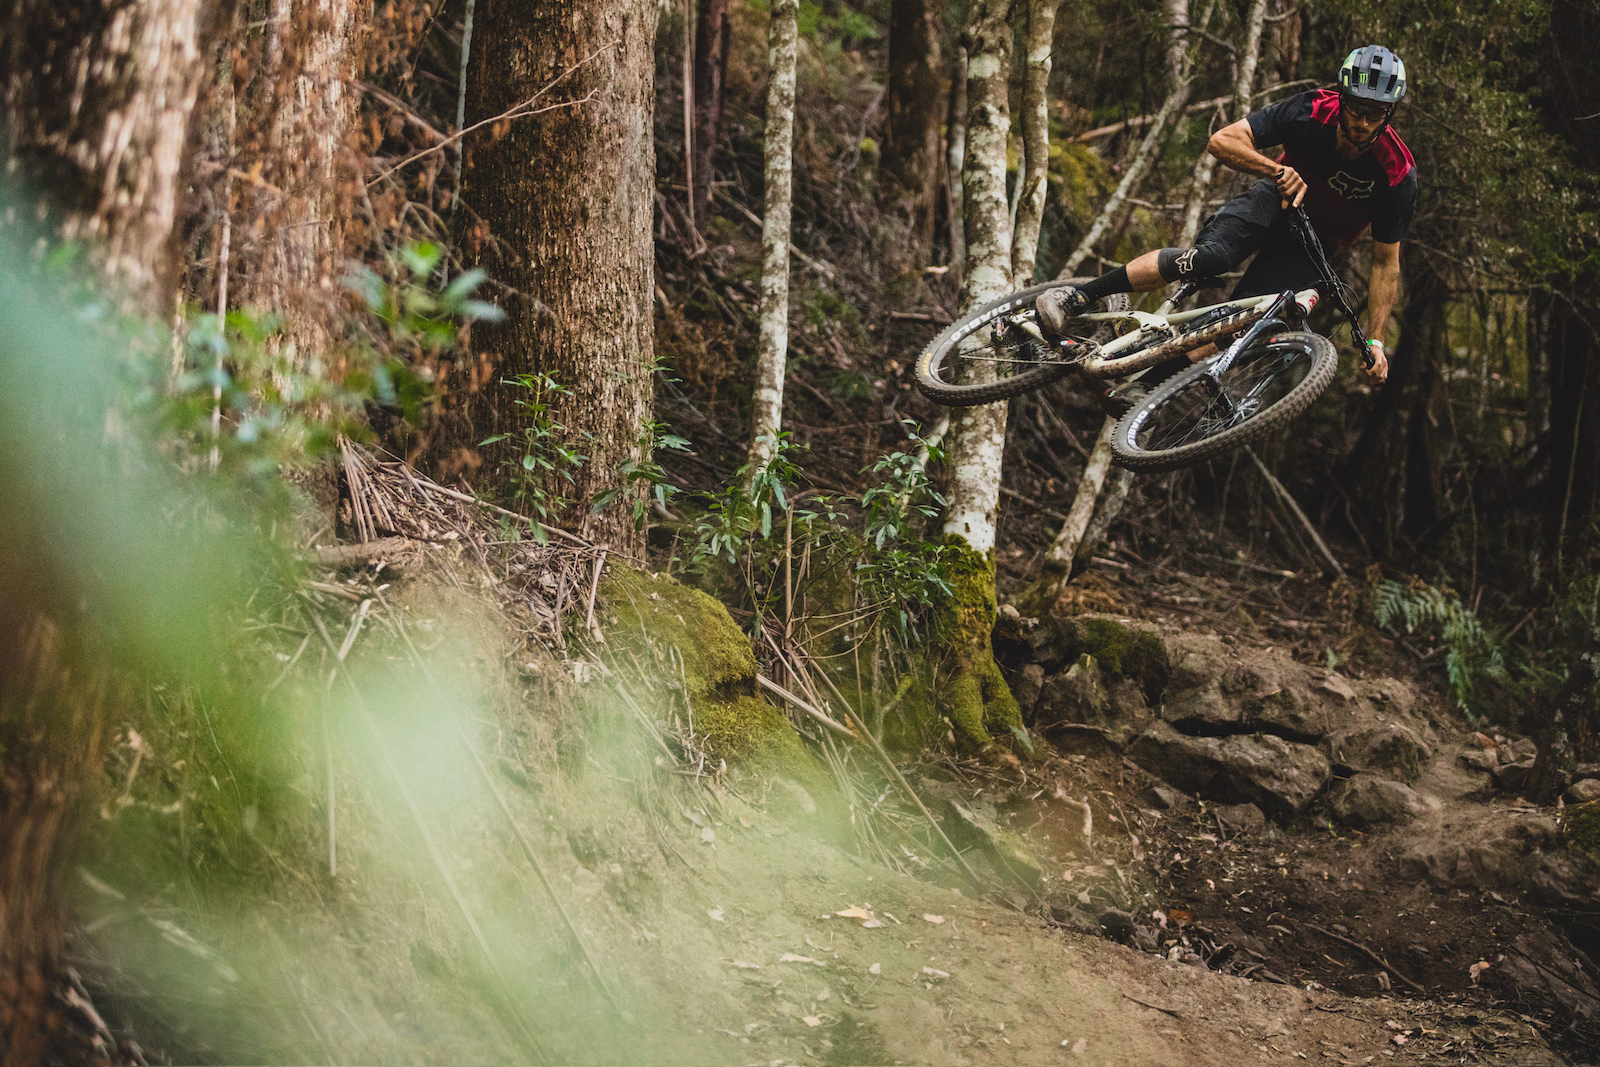 Connor Fearon rides the all-new carbon Process 29